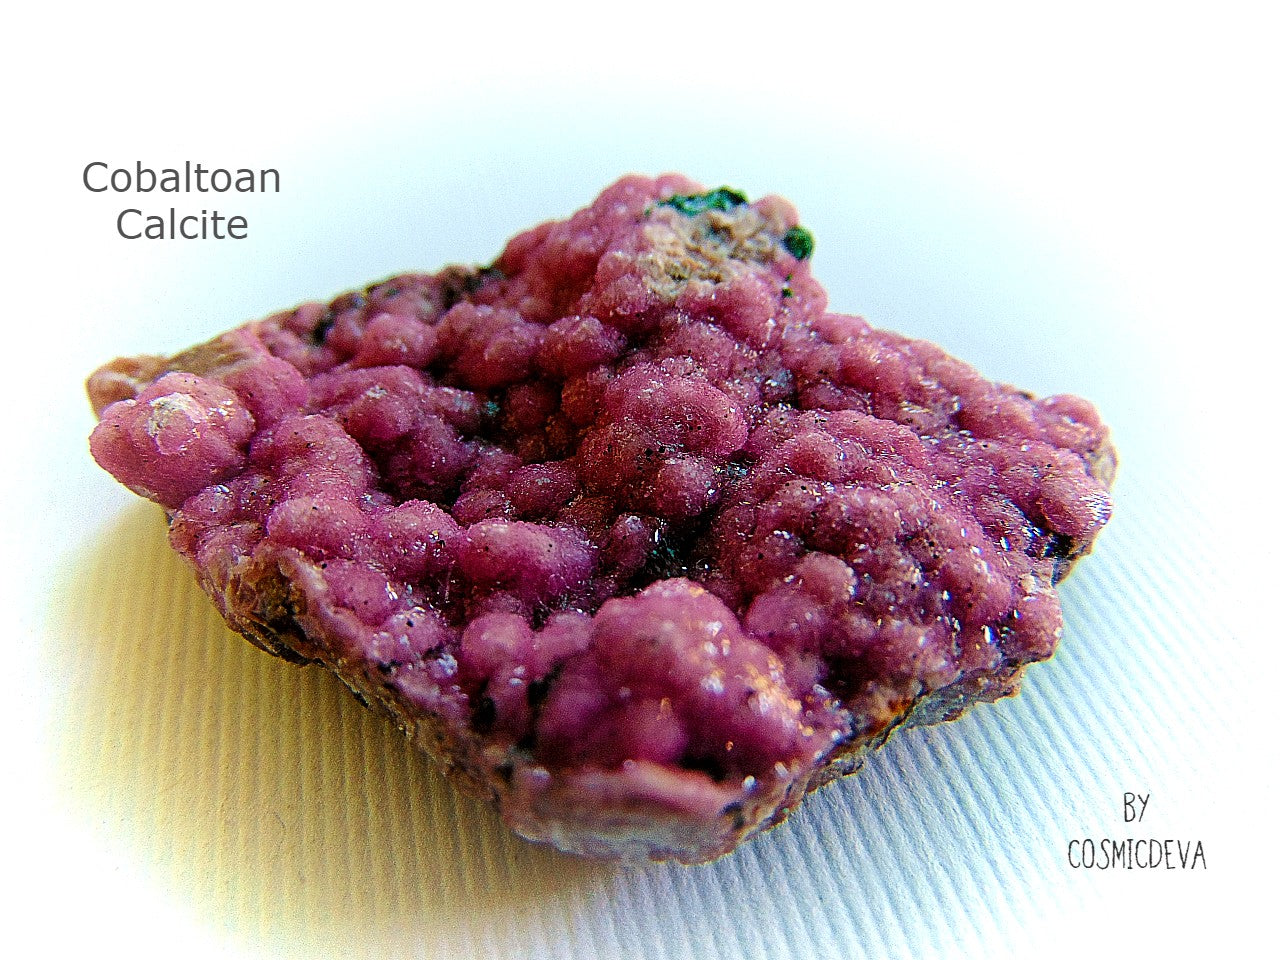 Glistering lustrous rose bubble gum pink color saturated bubbly boitroyal specimen of pink cobaltoan calcite, Cobaltoan Dolomite on matrix. The stunning crystals are small and very sparkly. Great for collectors or jewelry making.